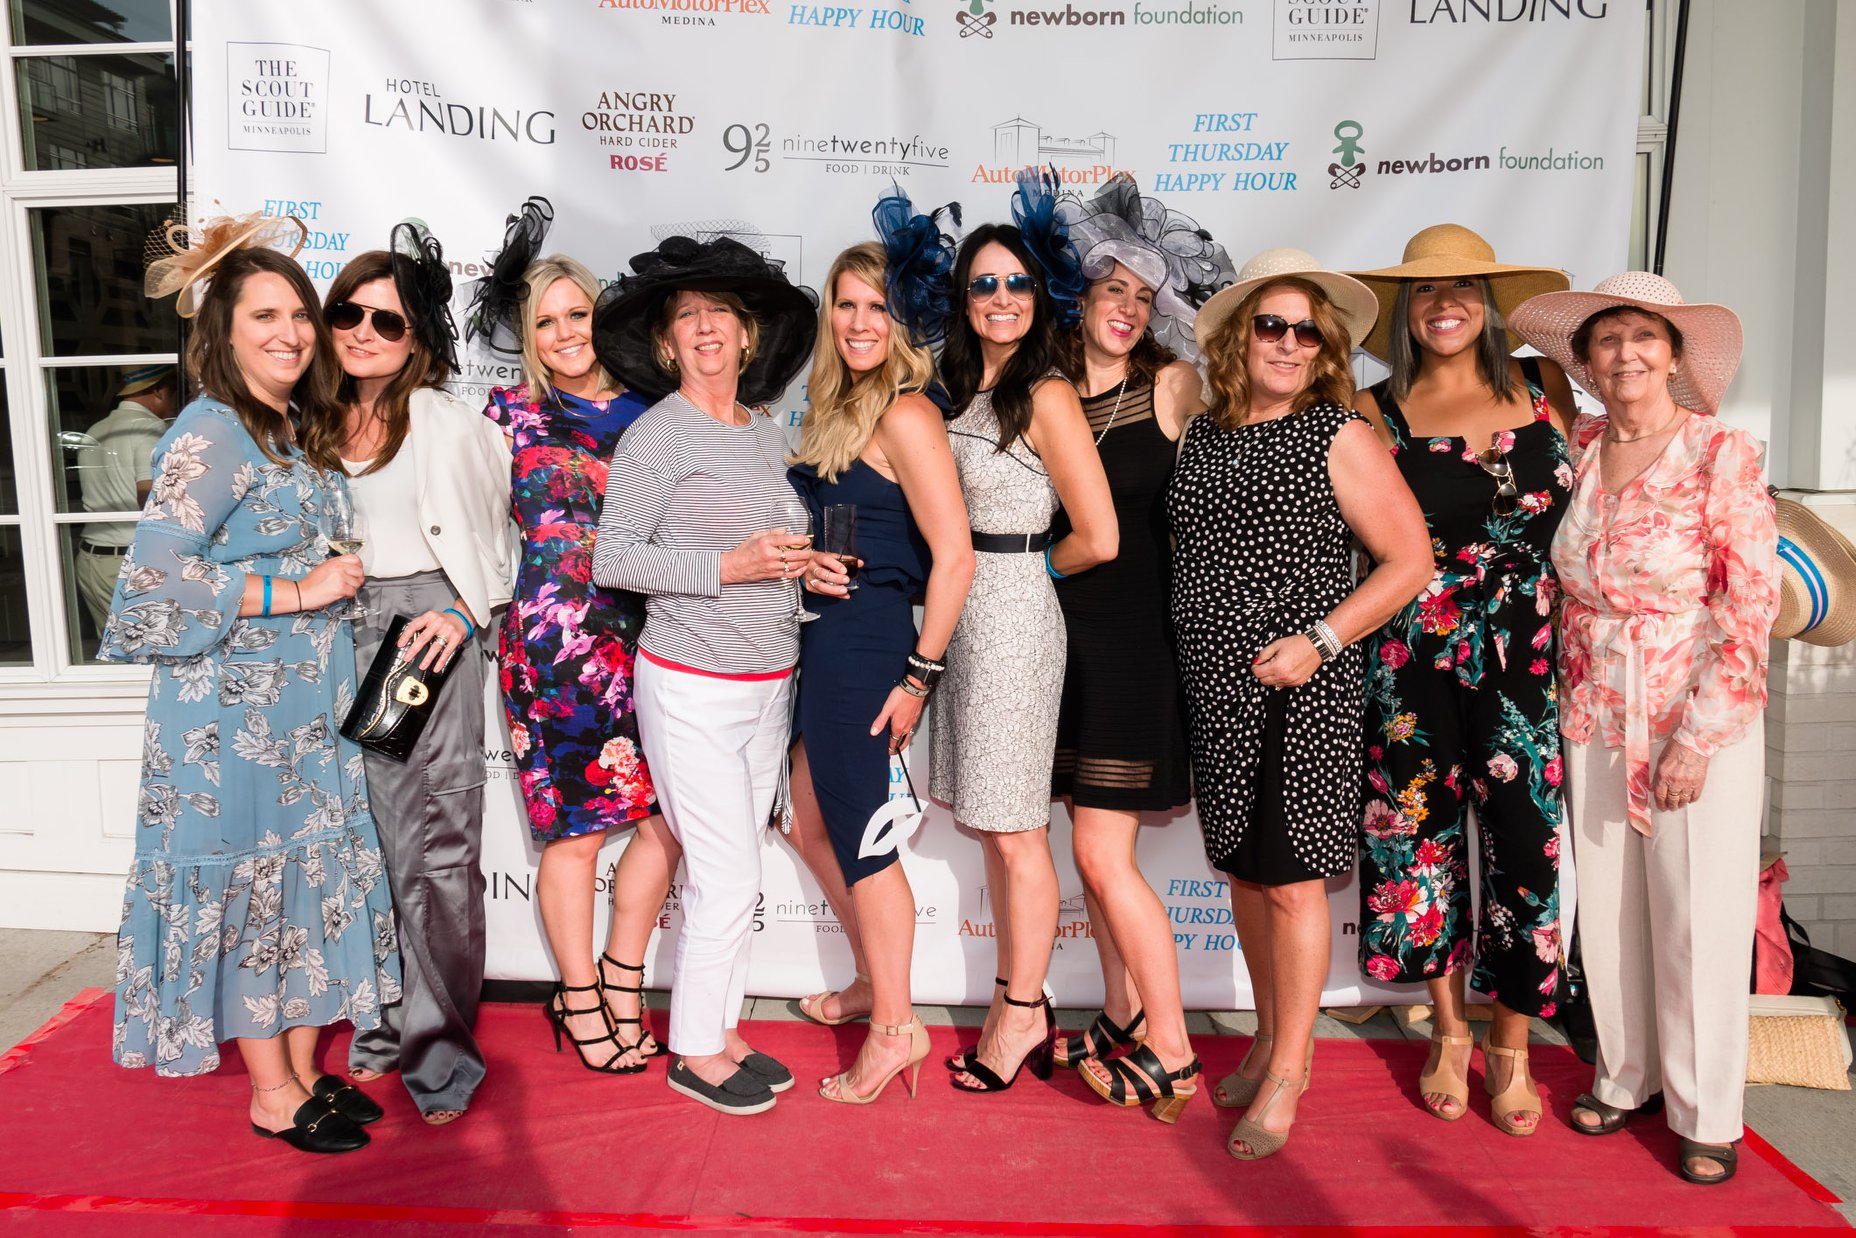 7th Annual Twin Cities Kentucky Derby Party